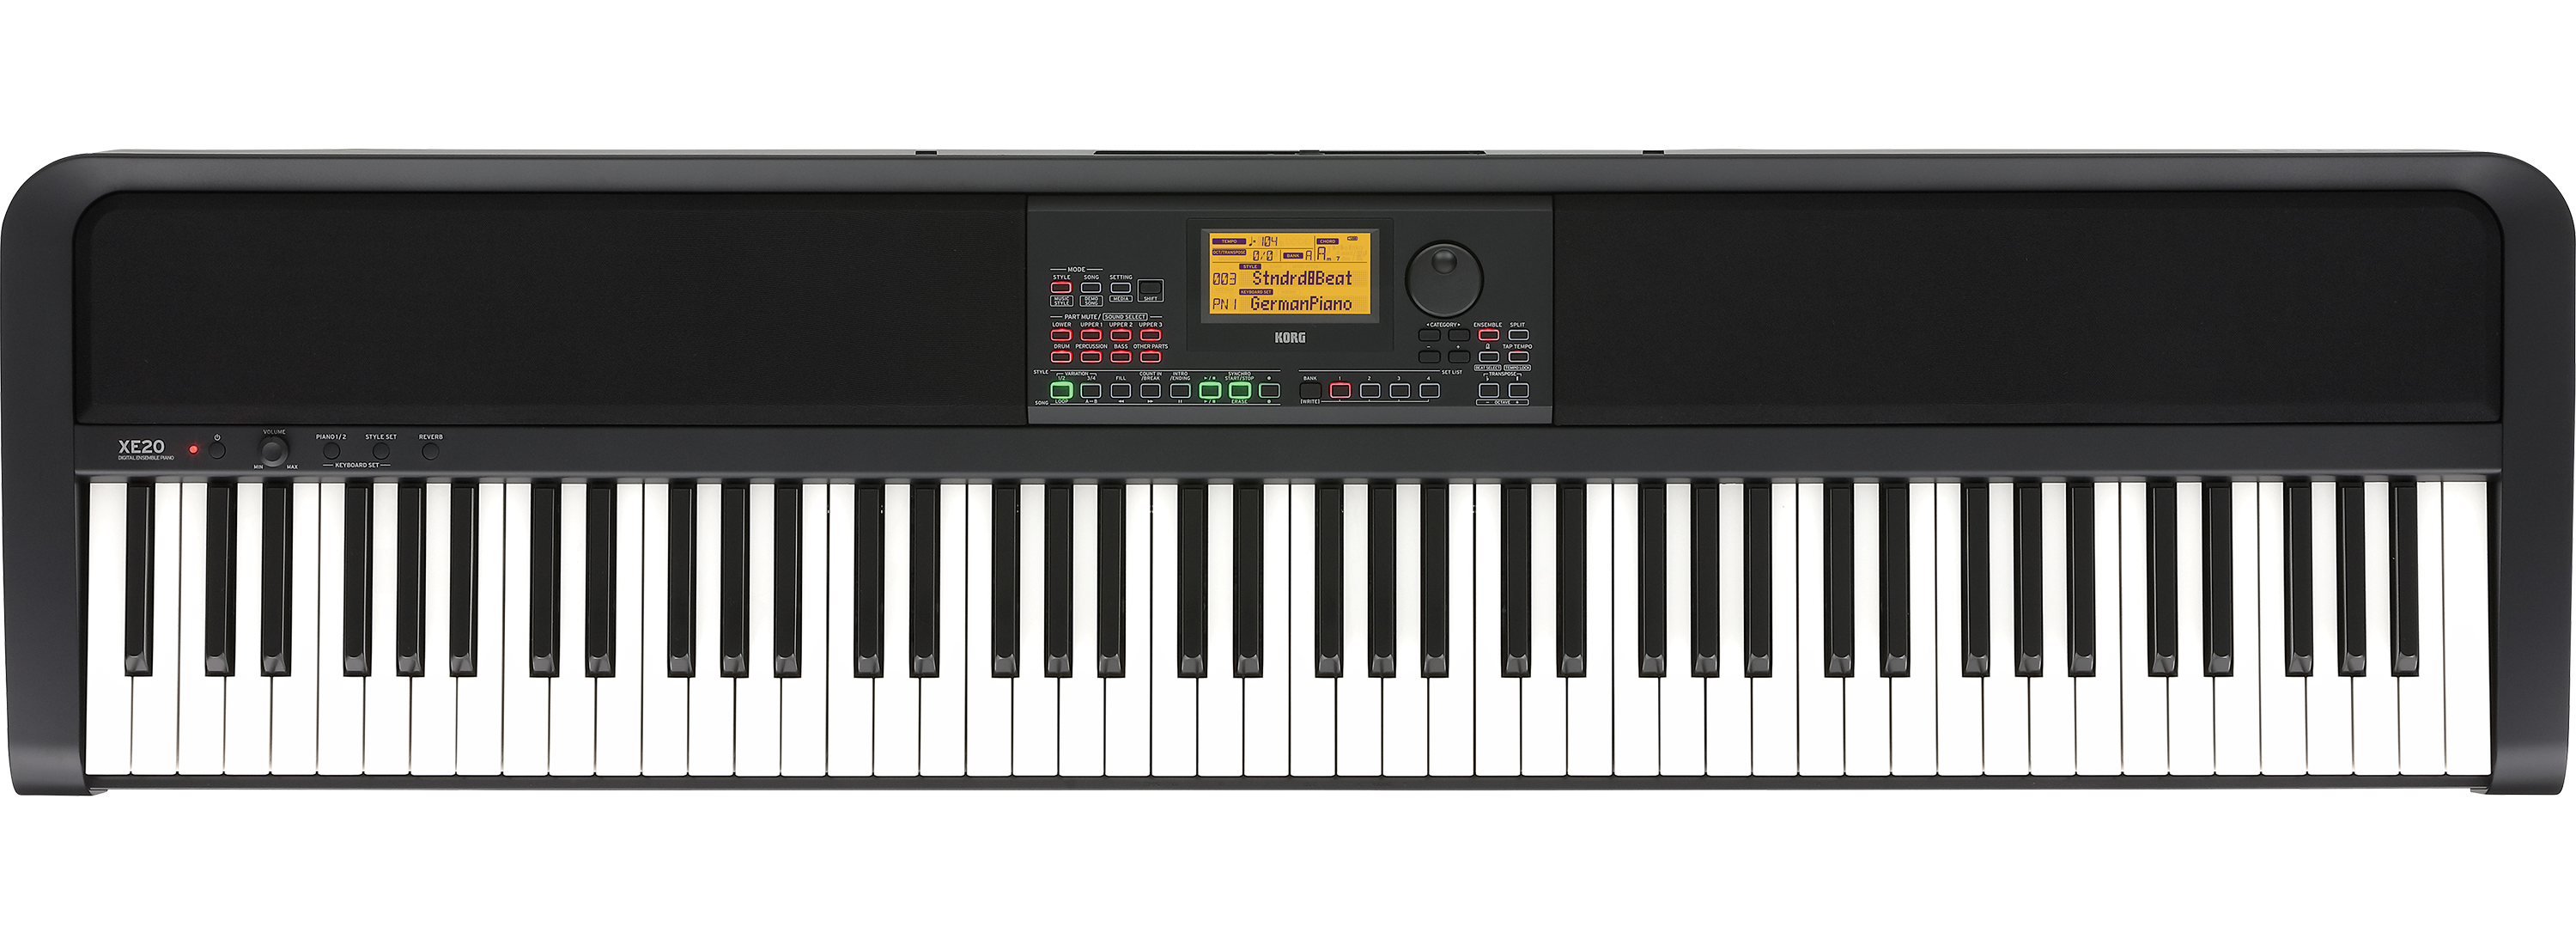 korg xe20 digital piano features